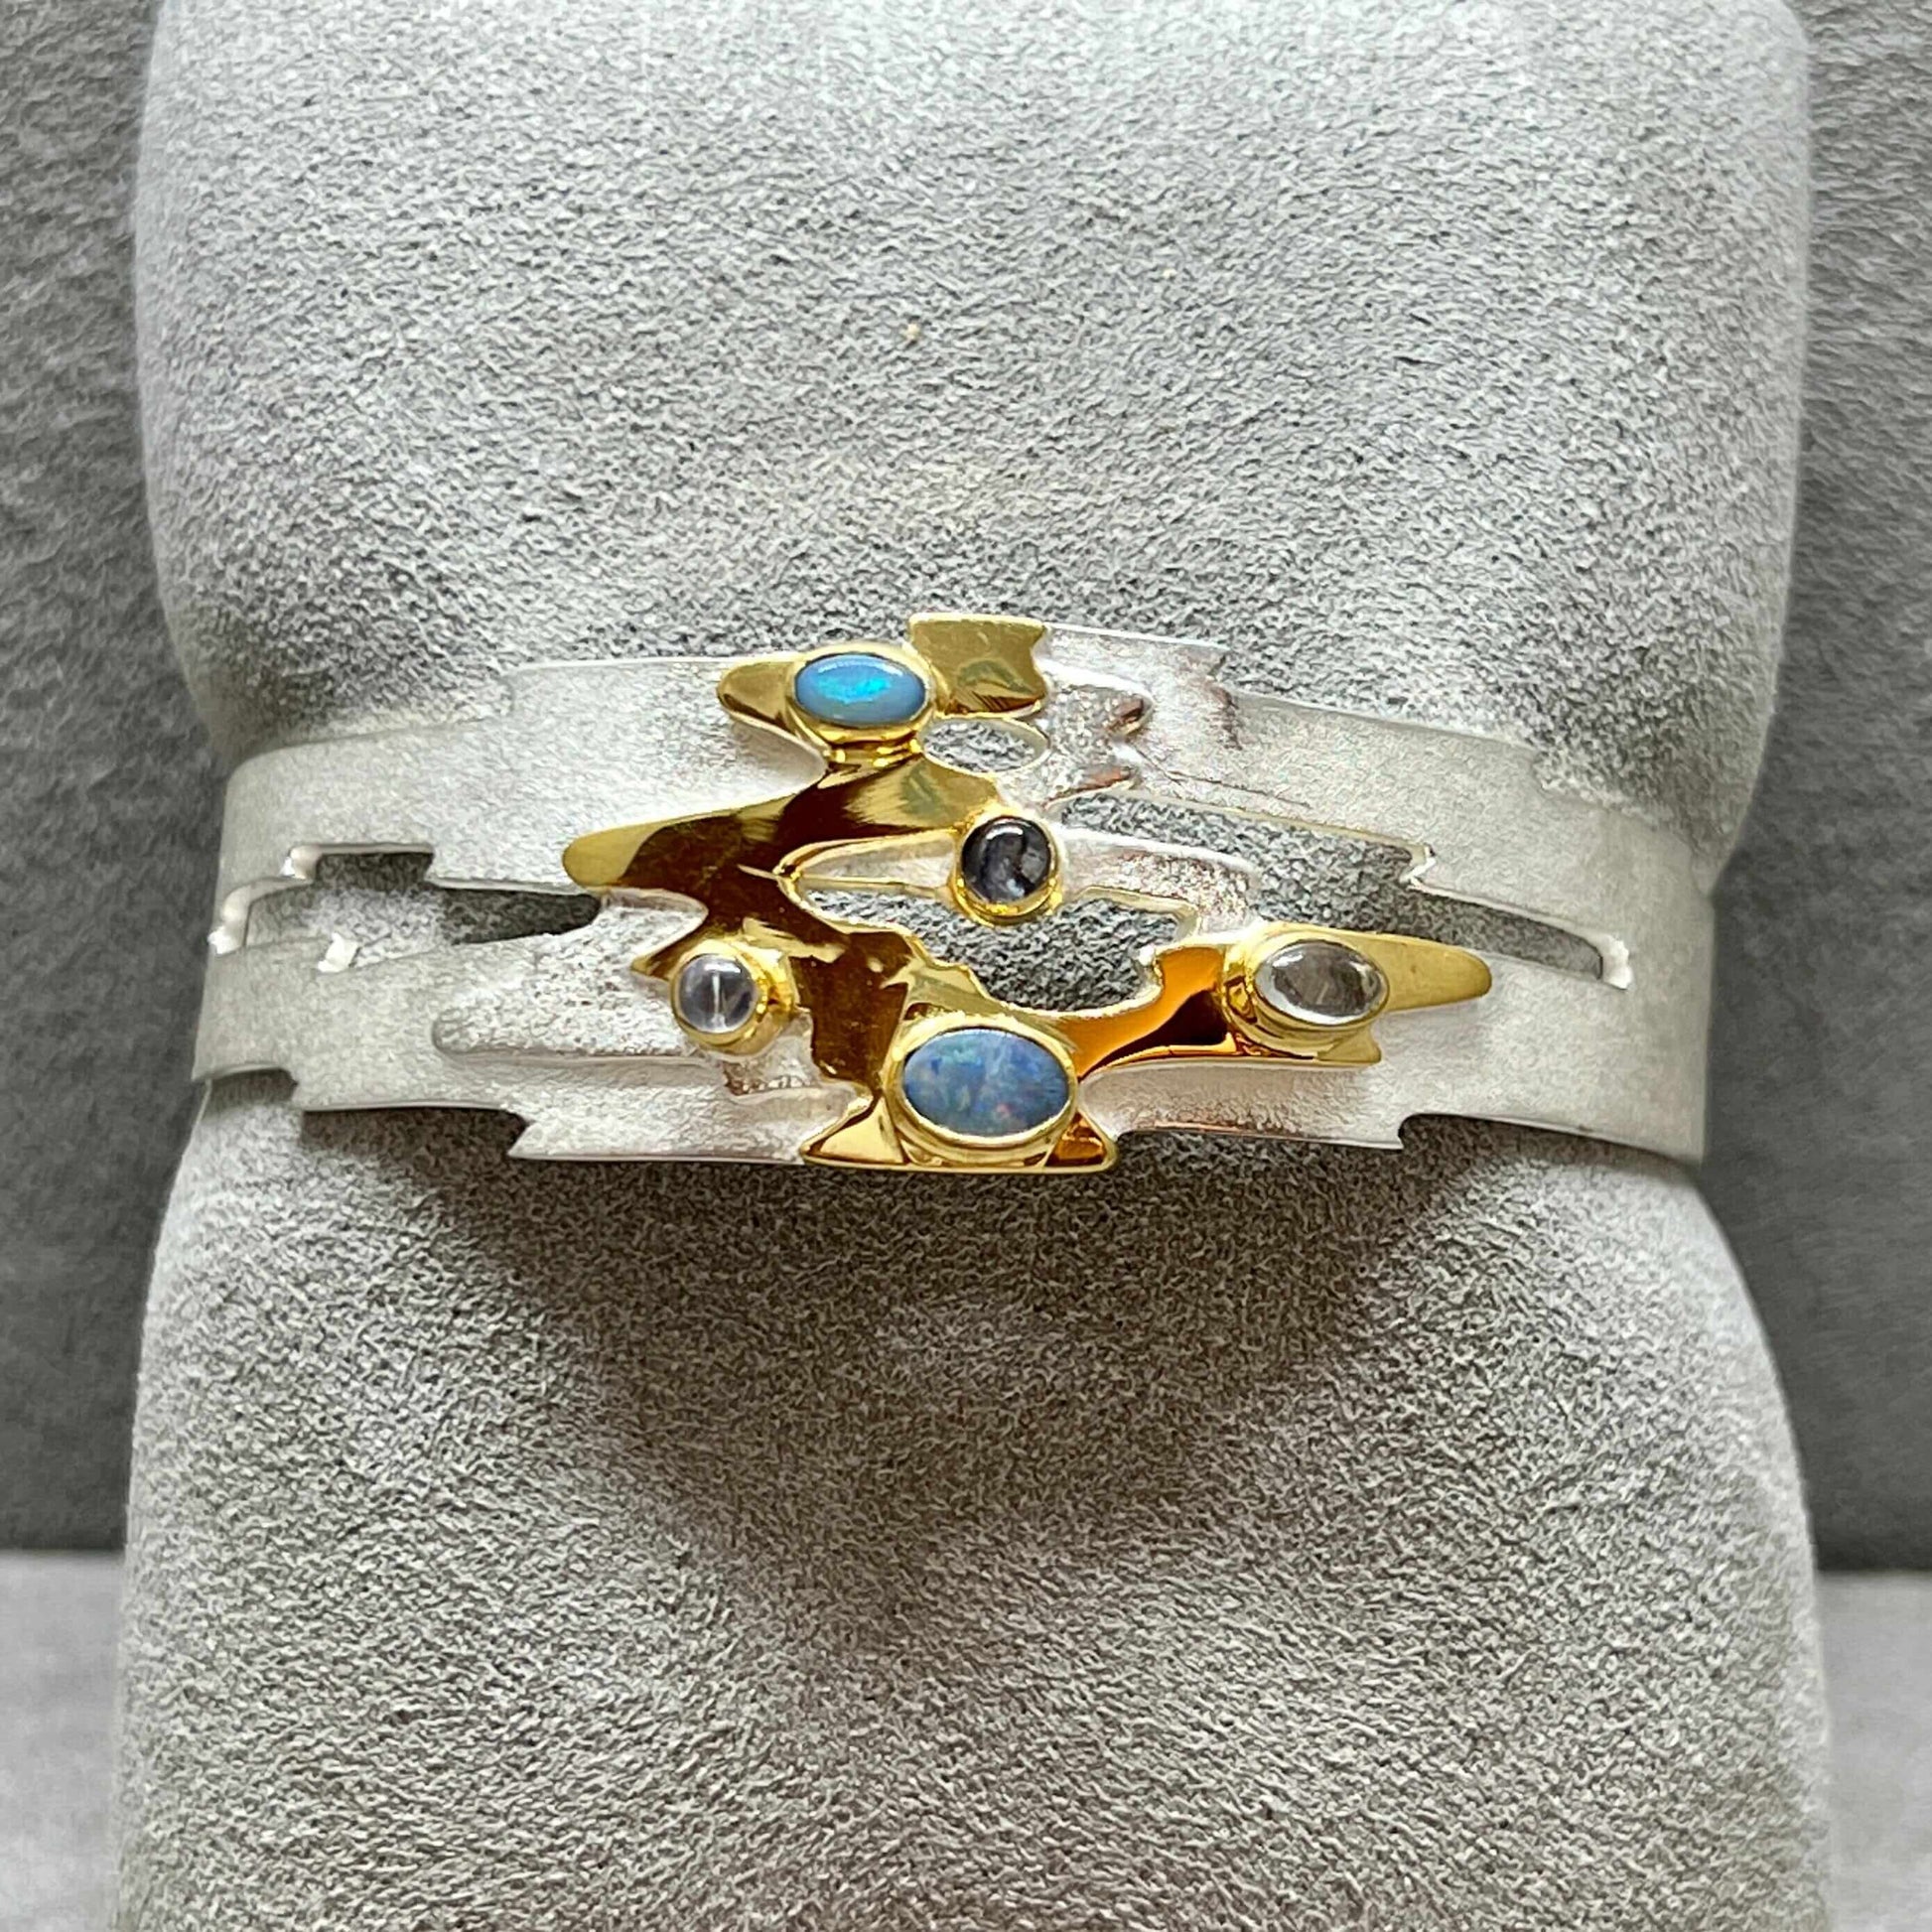 Monet Reflections Bangle - Sterling Silver with Opals, Moonstone & Iolite - Twelve Silver Trees